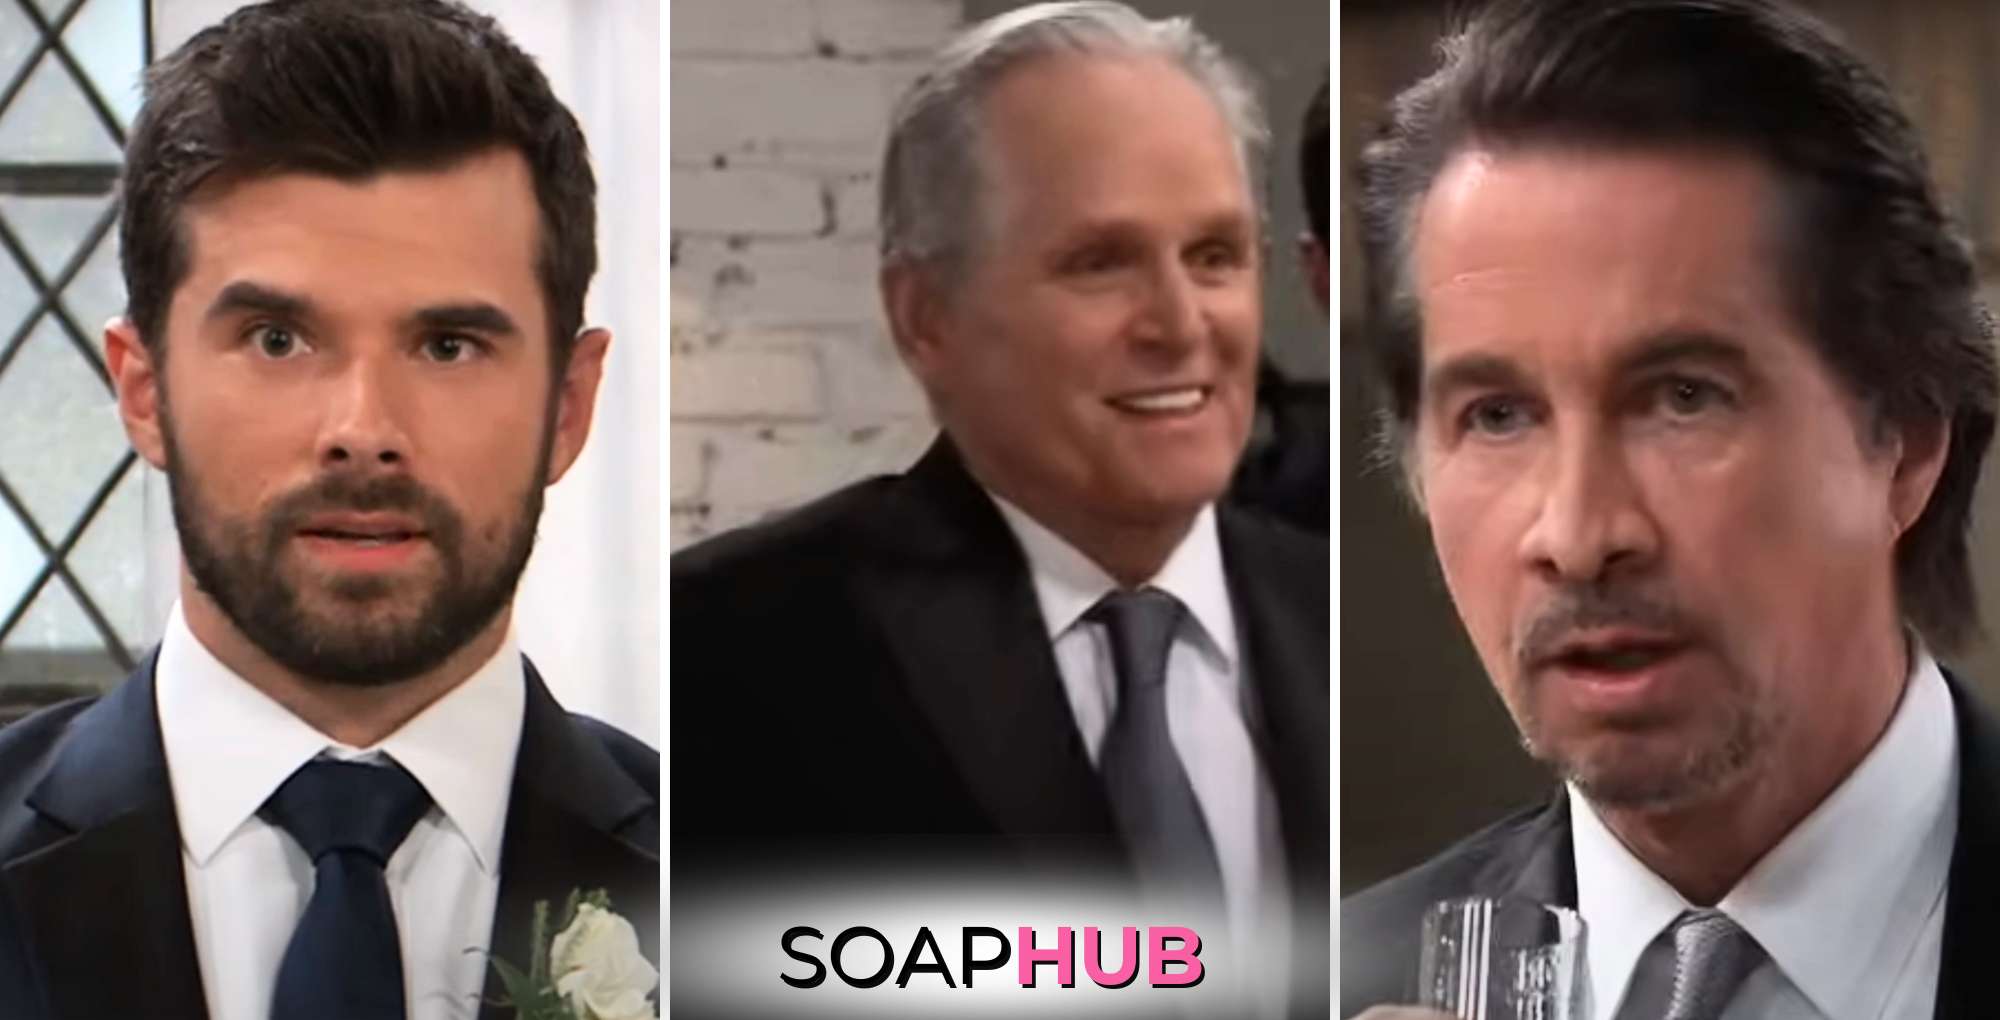 General Hospital spoilers May 16 with Chase, Gregory, and Finn at the wedding with the Soap Hub logo.